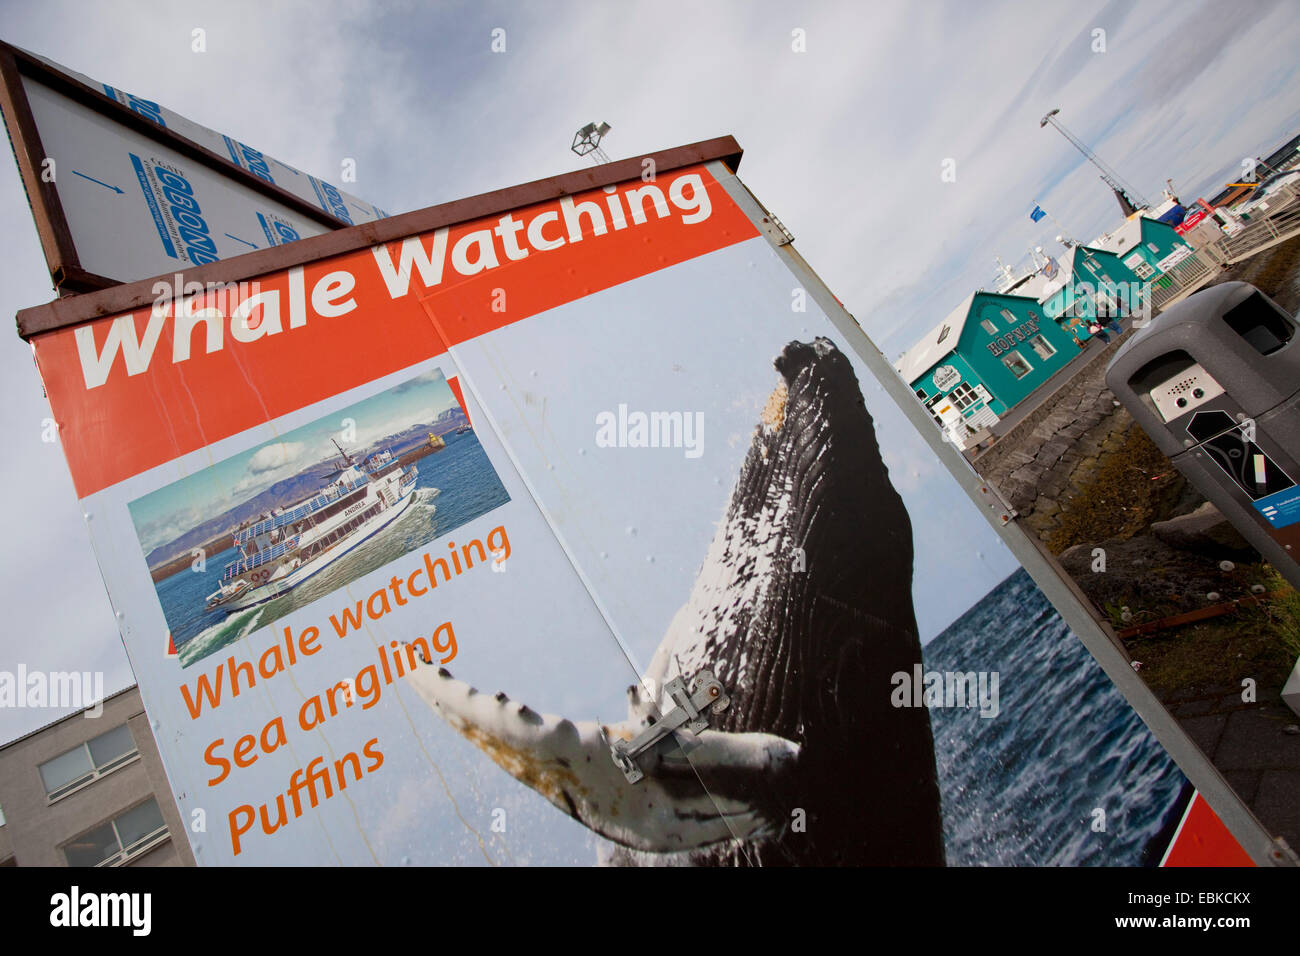 Promotions for whale and seabird watching tours, Iceland, Reykjavik Stock Photo